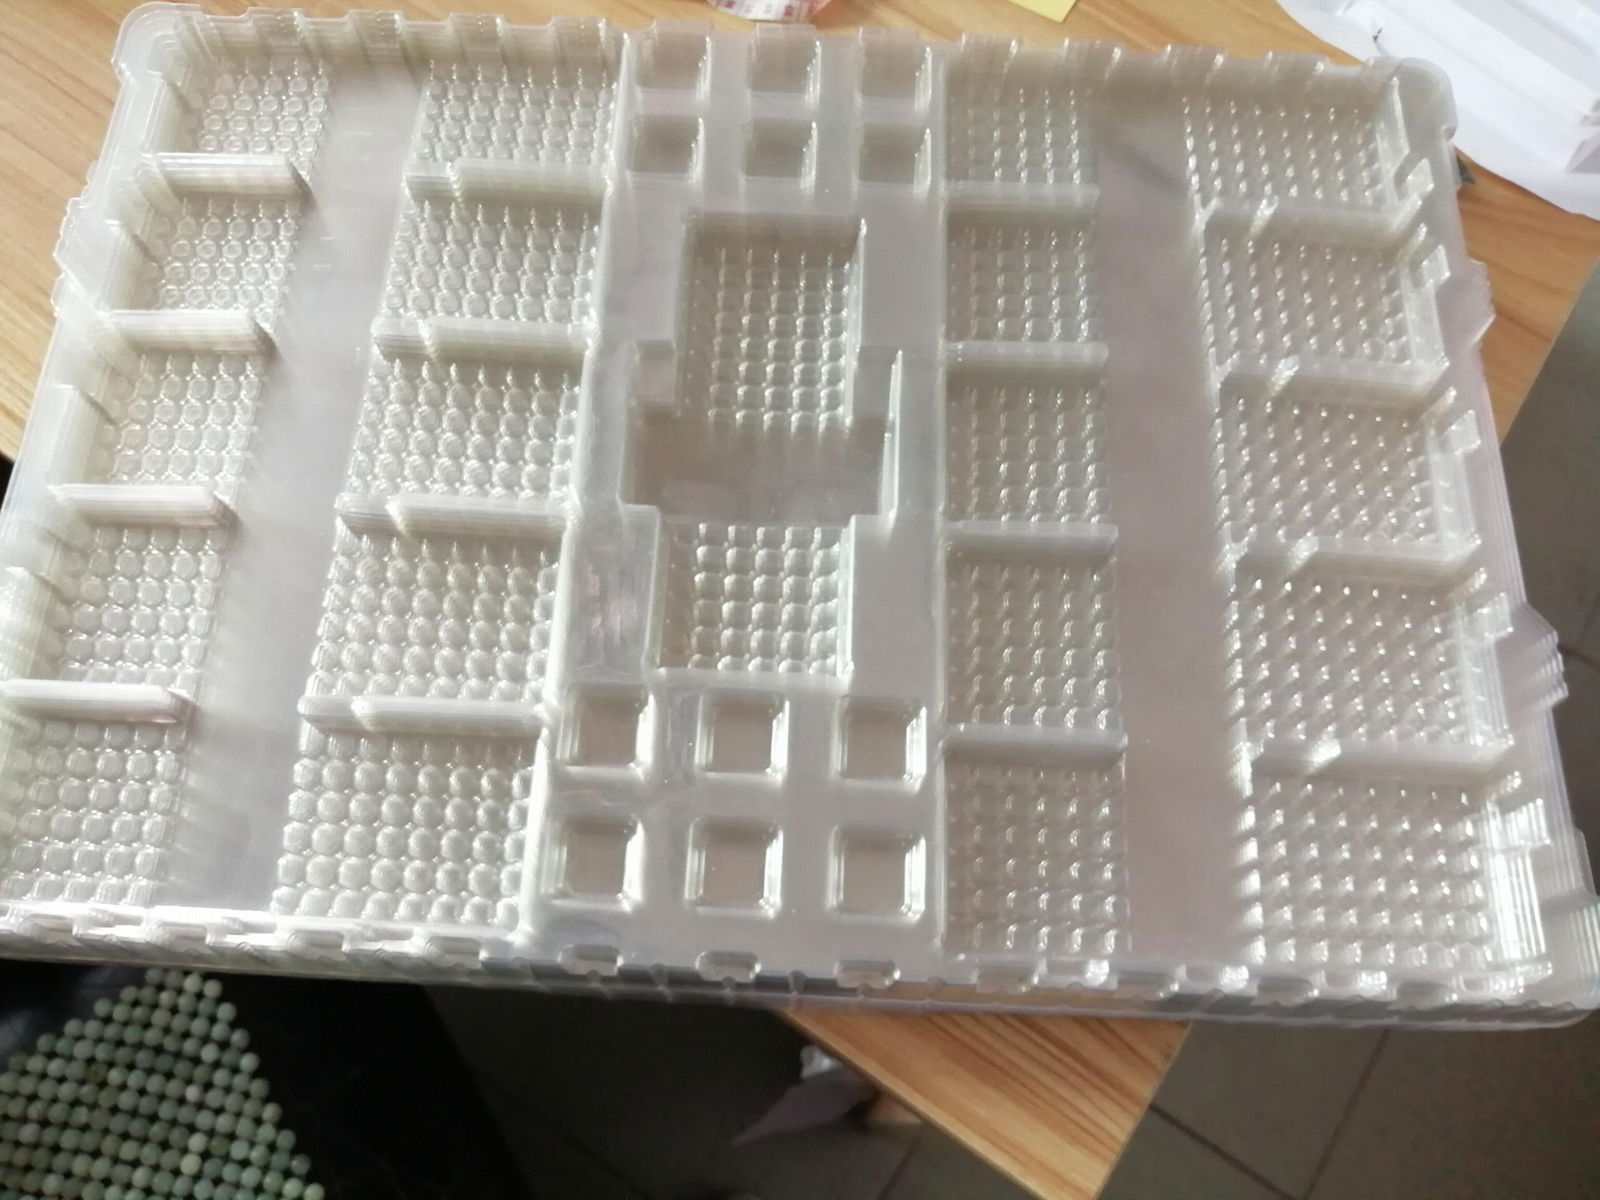 Production of Plastic-Production of Intelligent Positioning Watch Packaging Box  5